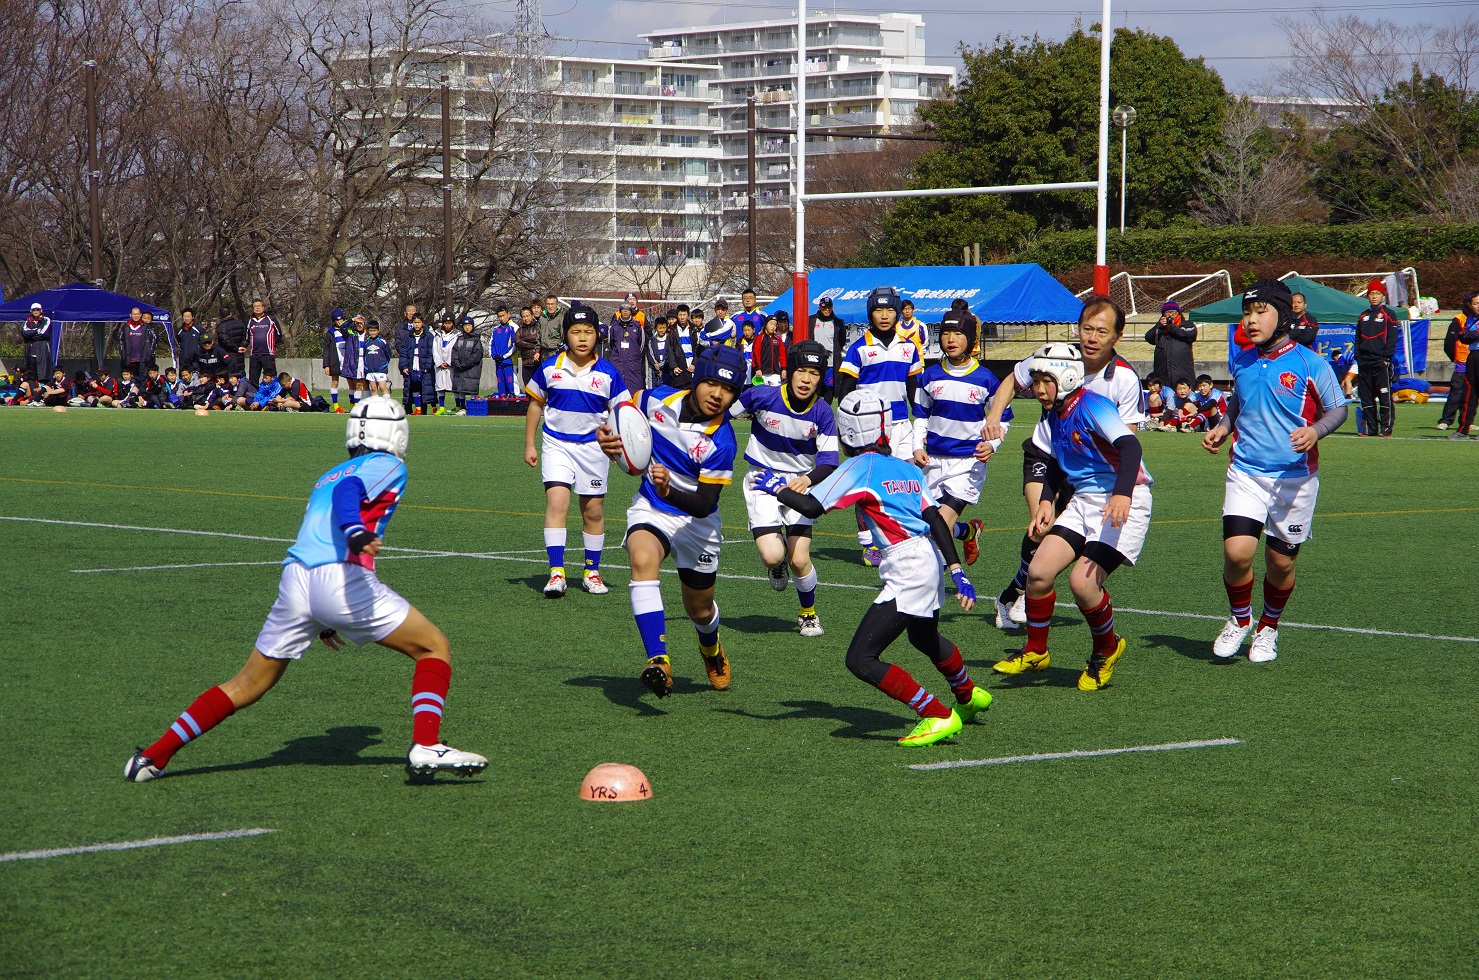 http://kamakura-rugby.com/tsubuyaki/images/%EF%BE%8C%EF%BD%A7%EF%BD%B2%EF%BE%85%EF%BE%99%EF%BD%B6%EF%BD%AF%EF%BE%8C%EF%BE%9F%E2%91%A1.jpg